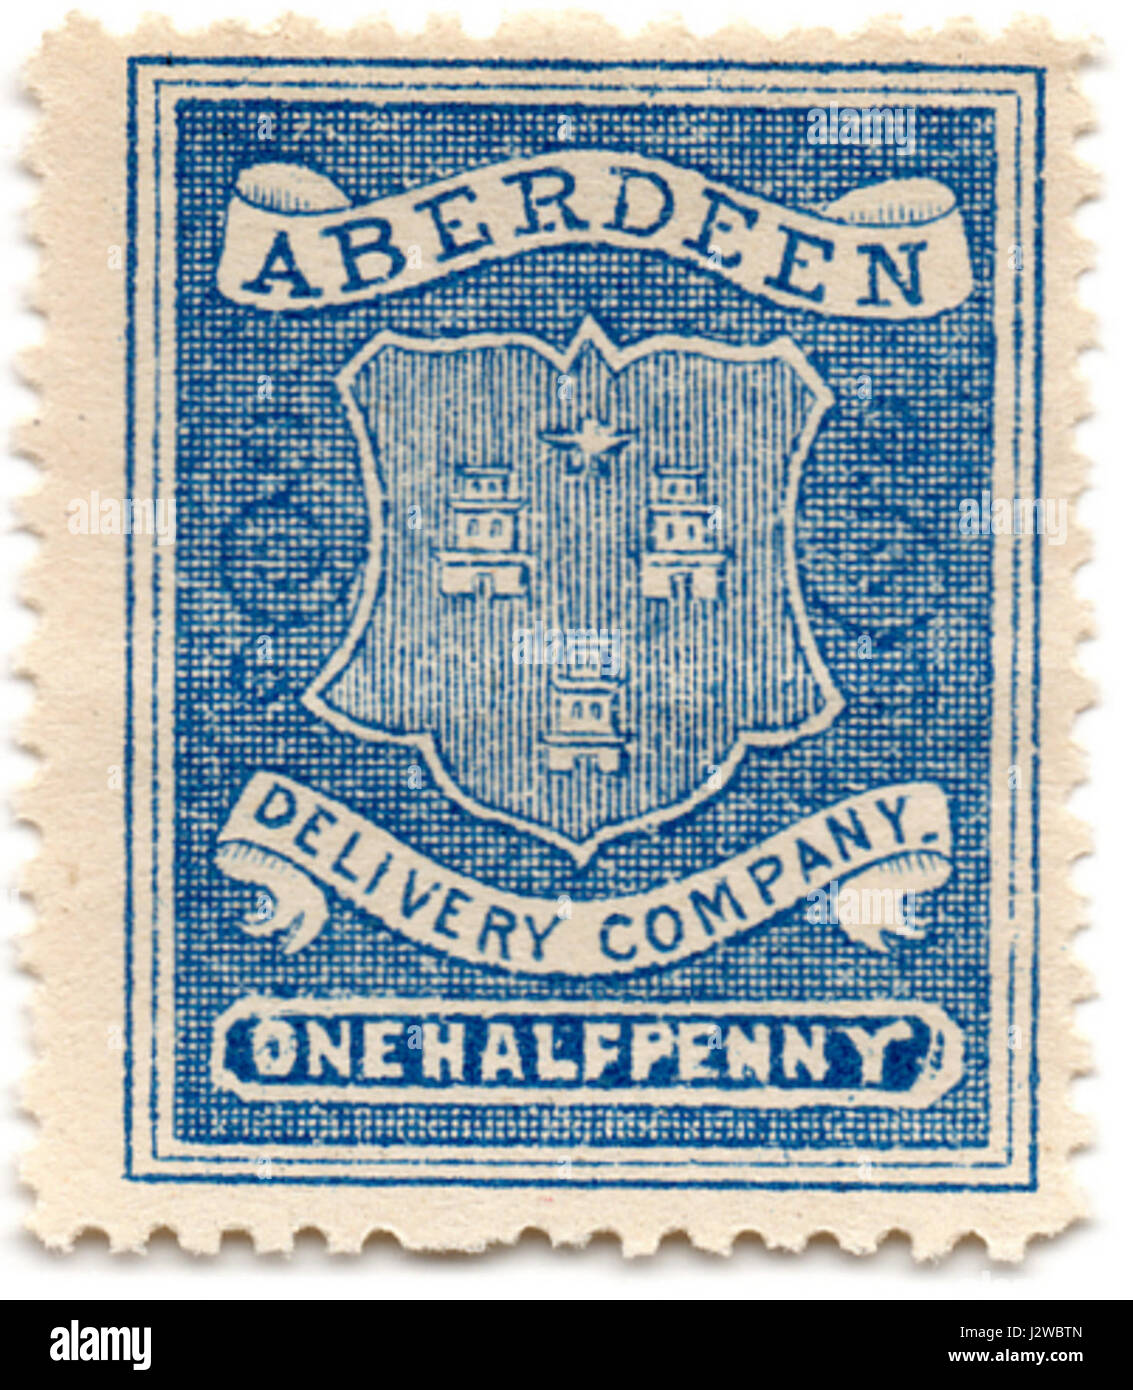 Aberdeen Delivery Company half penny stamp Stock Photo